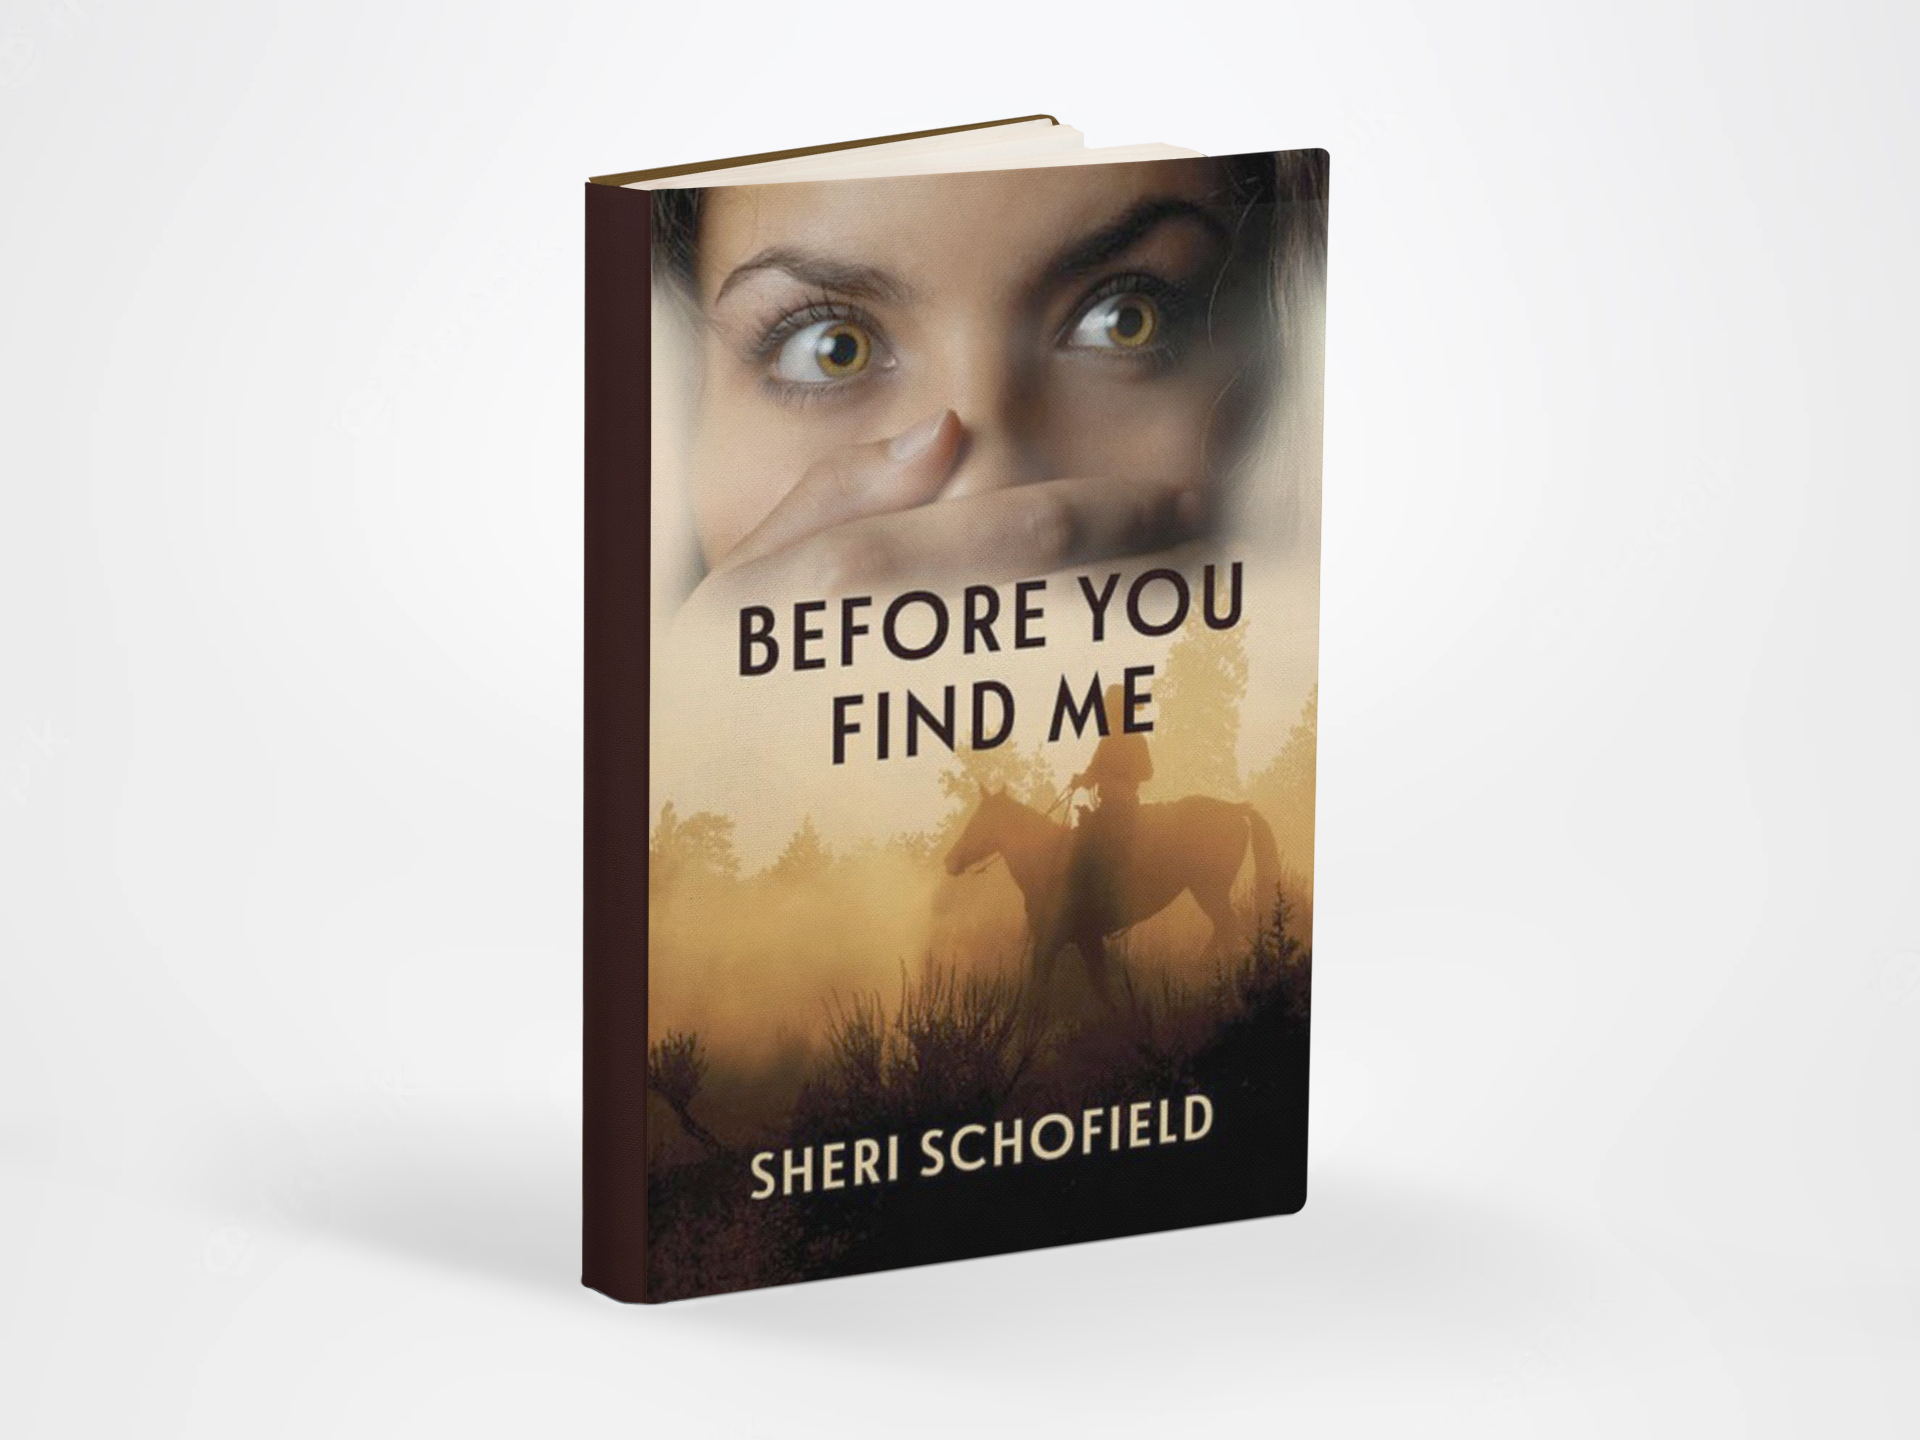 Sheri Schofield’s Before You Find Me is a Spell-Binding Romantic Suspense Novel That Inspires Readers to Trust God in Difficult Times